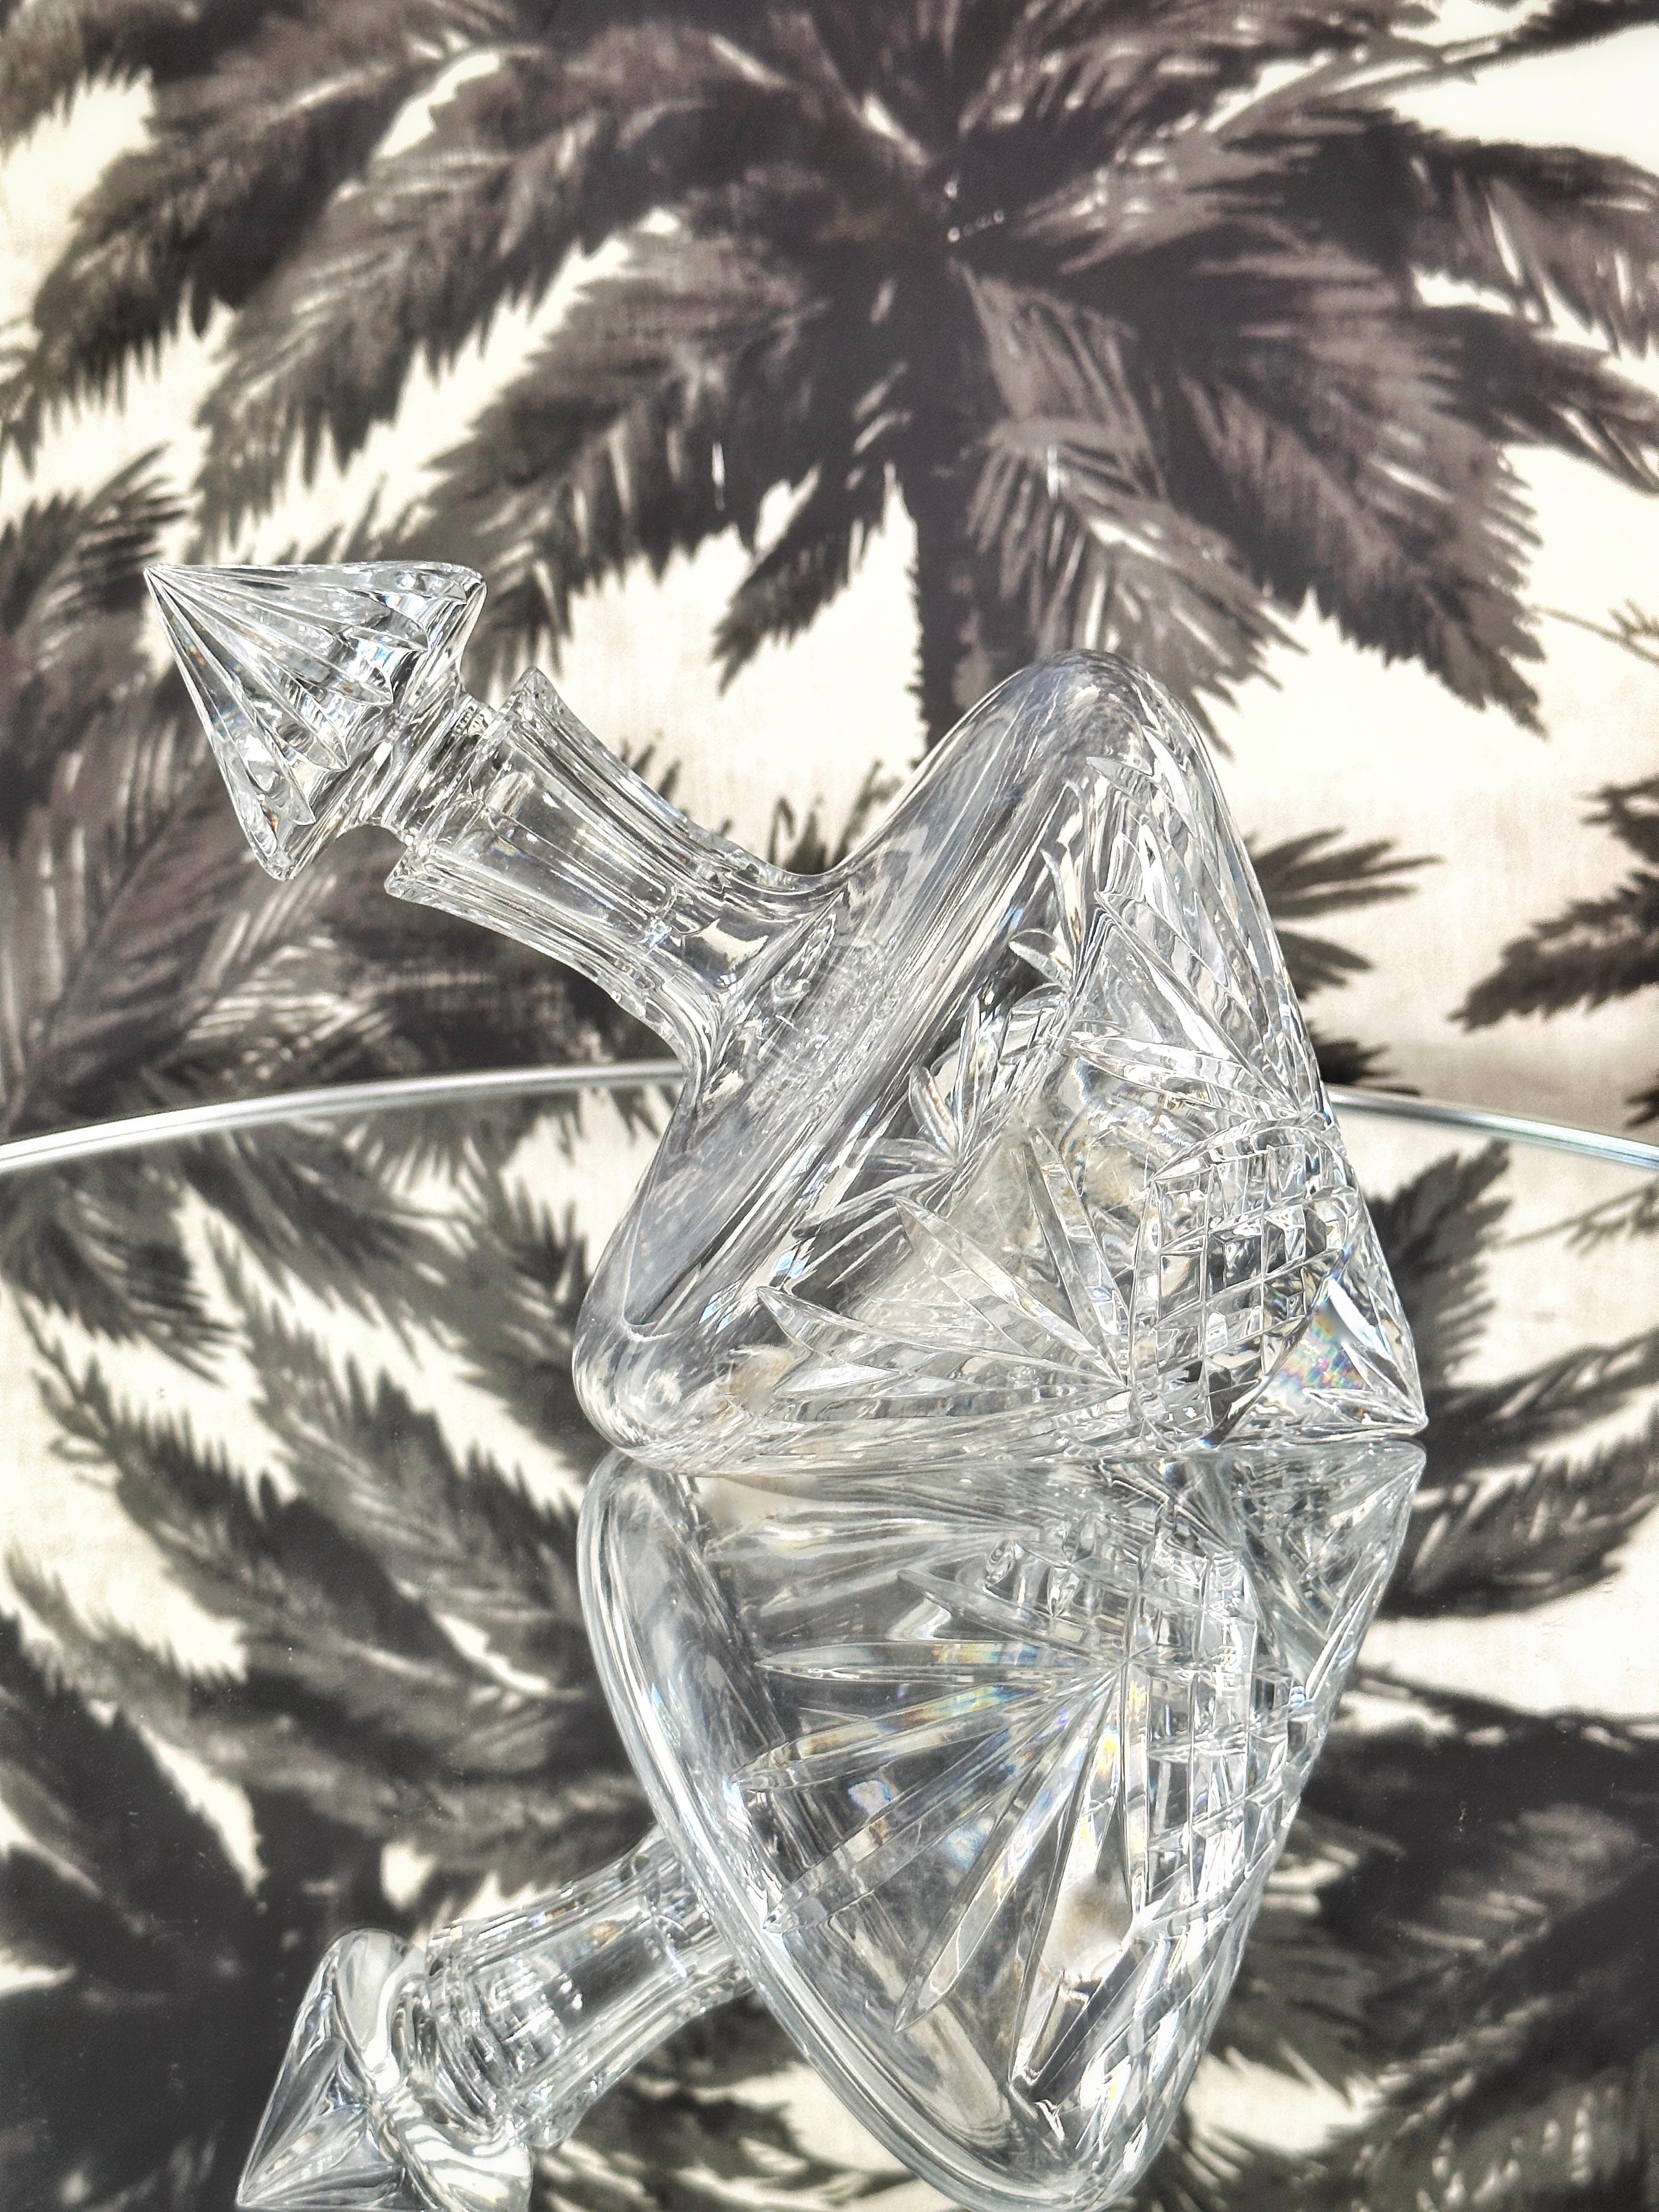 Stunning vintage tilted spirits decanter by Waterford Crystal. Handcrafted and mouth-blown lead crystal featuring brilliant prismatic diamond cuts with etched designs throughout. Also features fluted accents along the stem and is fitted with pointed